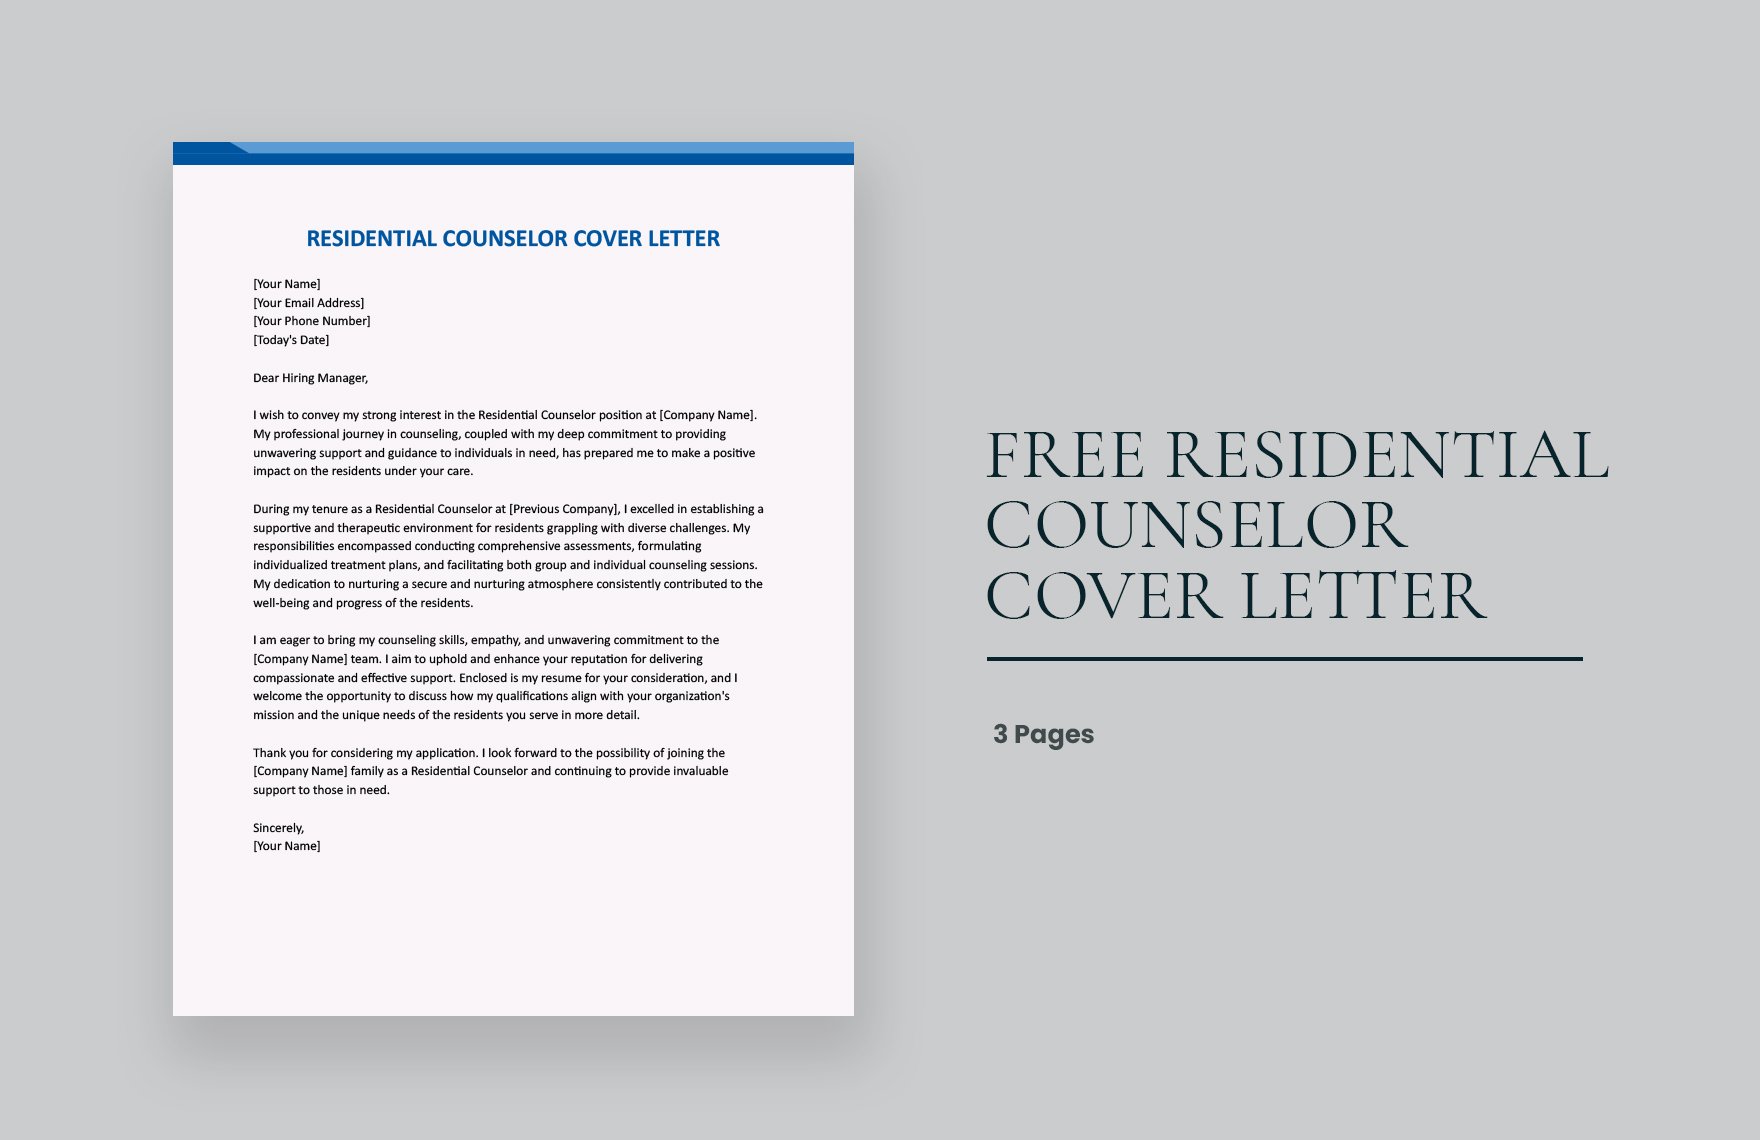 Residential Counselor Cover Letter